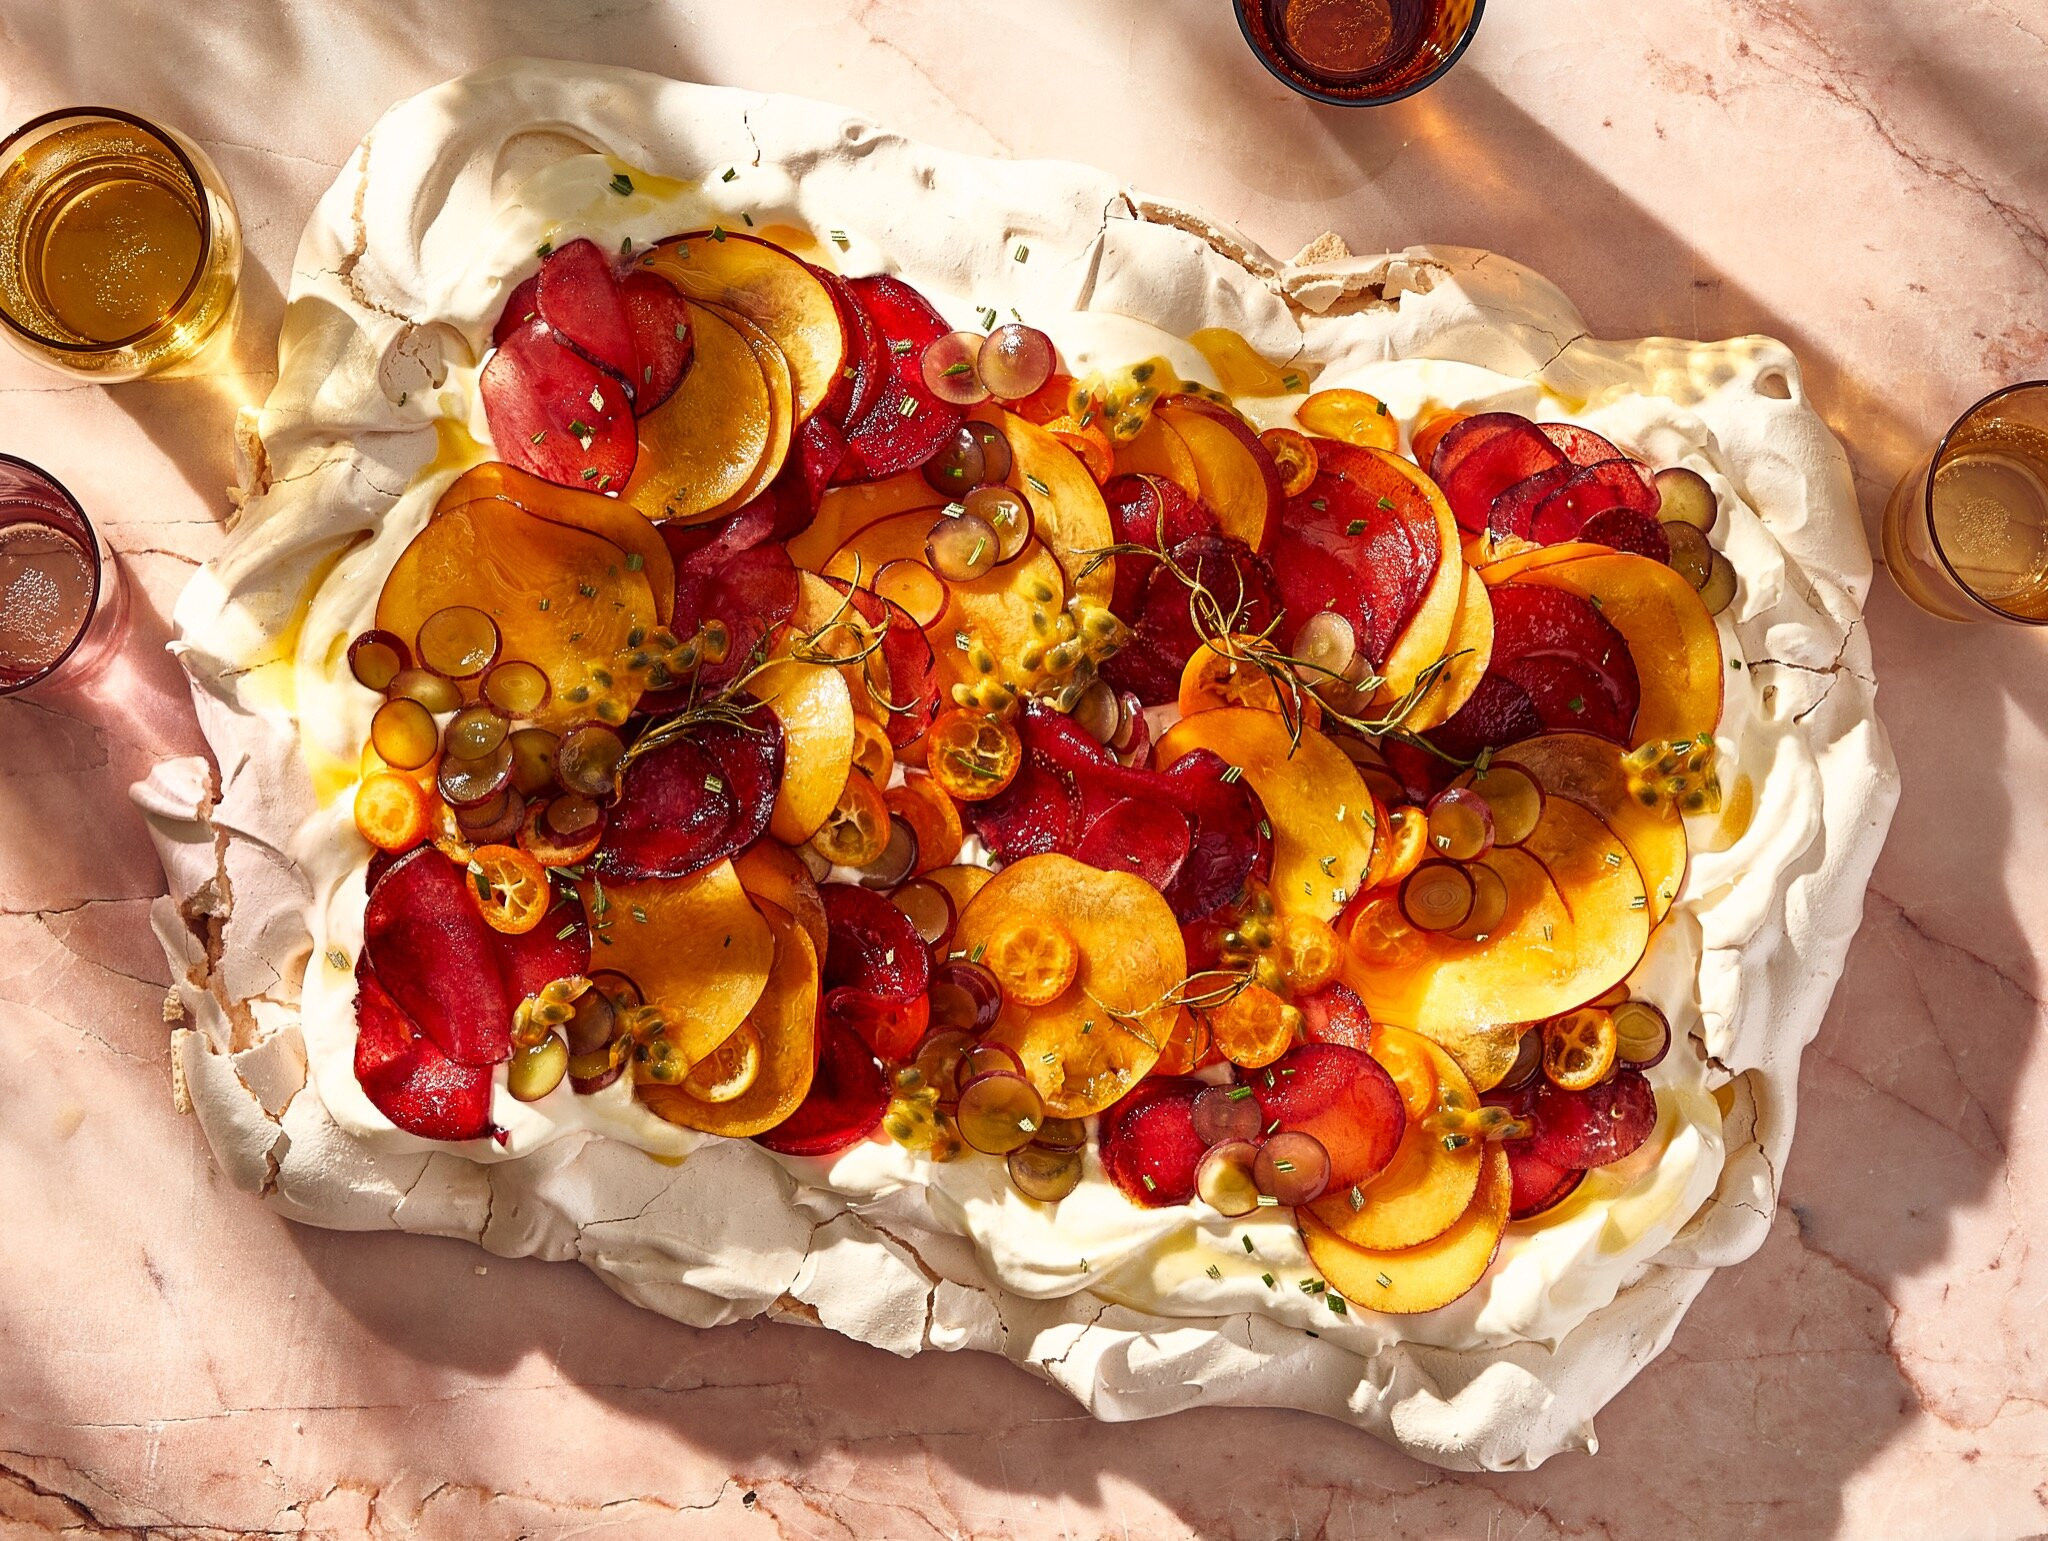 Yotam Ottolenghi Has Made Thousands of Meringues